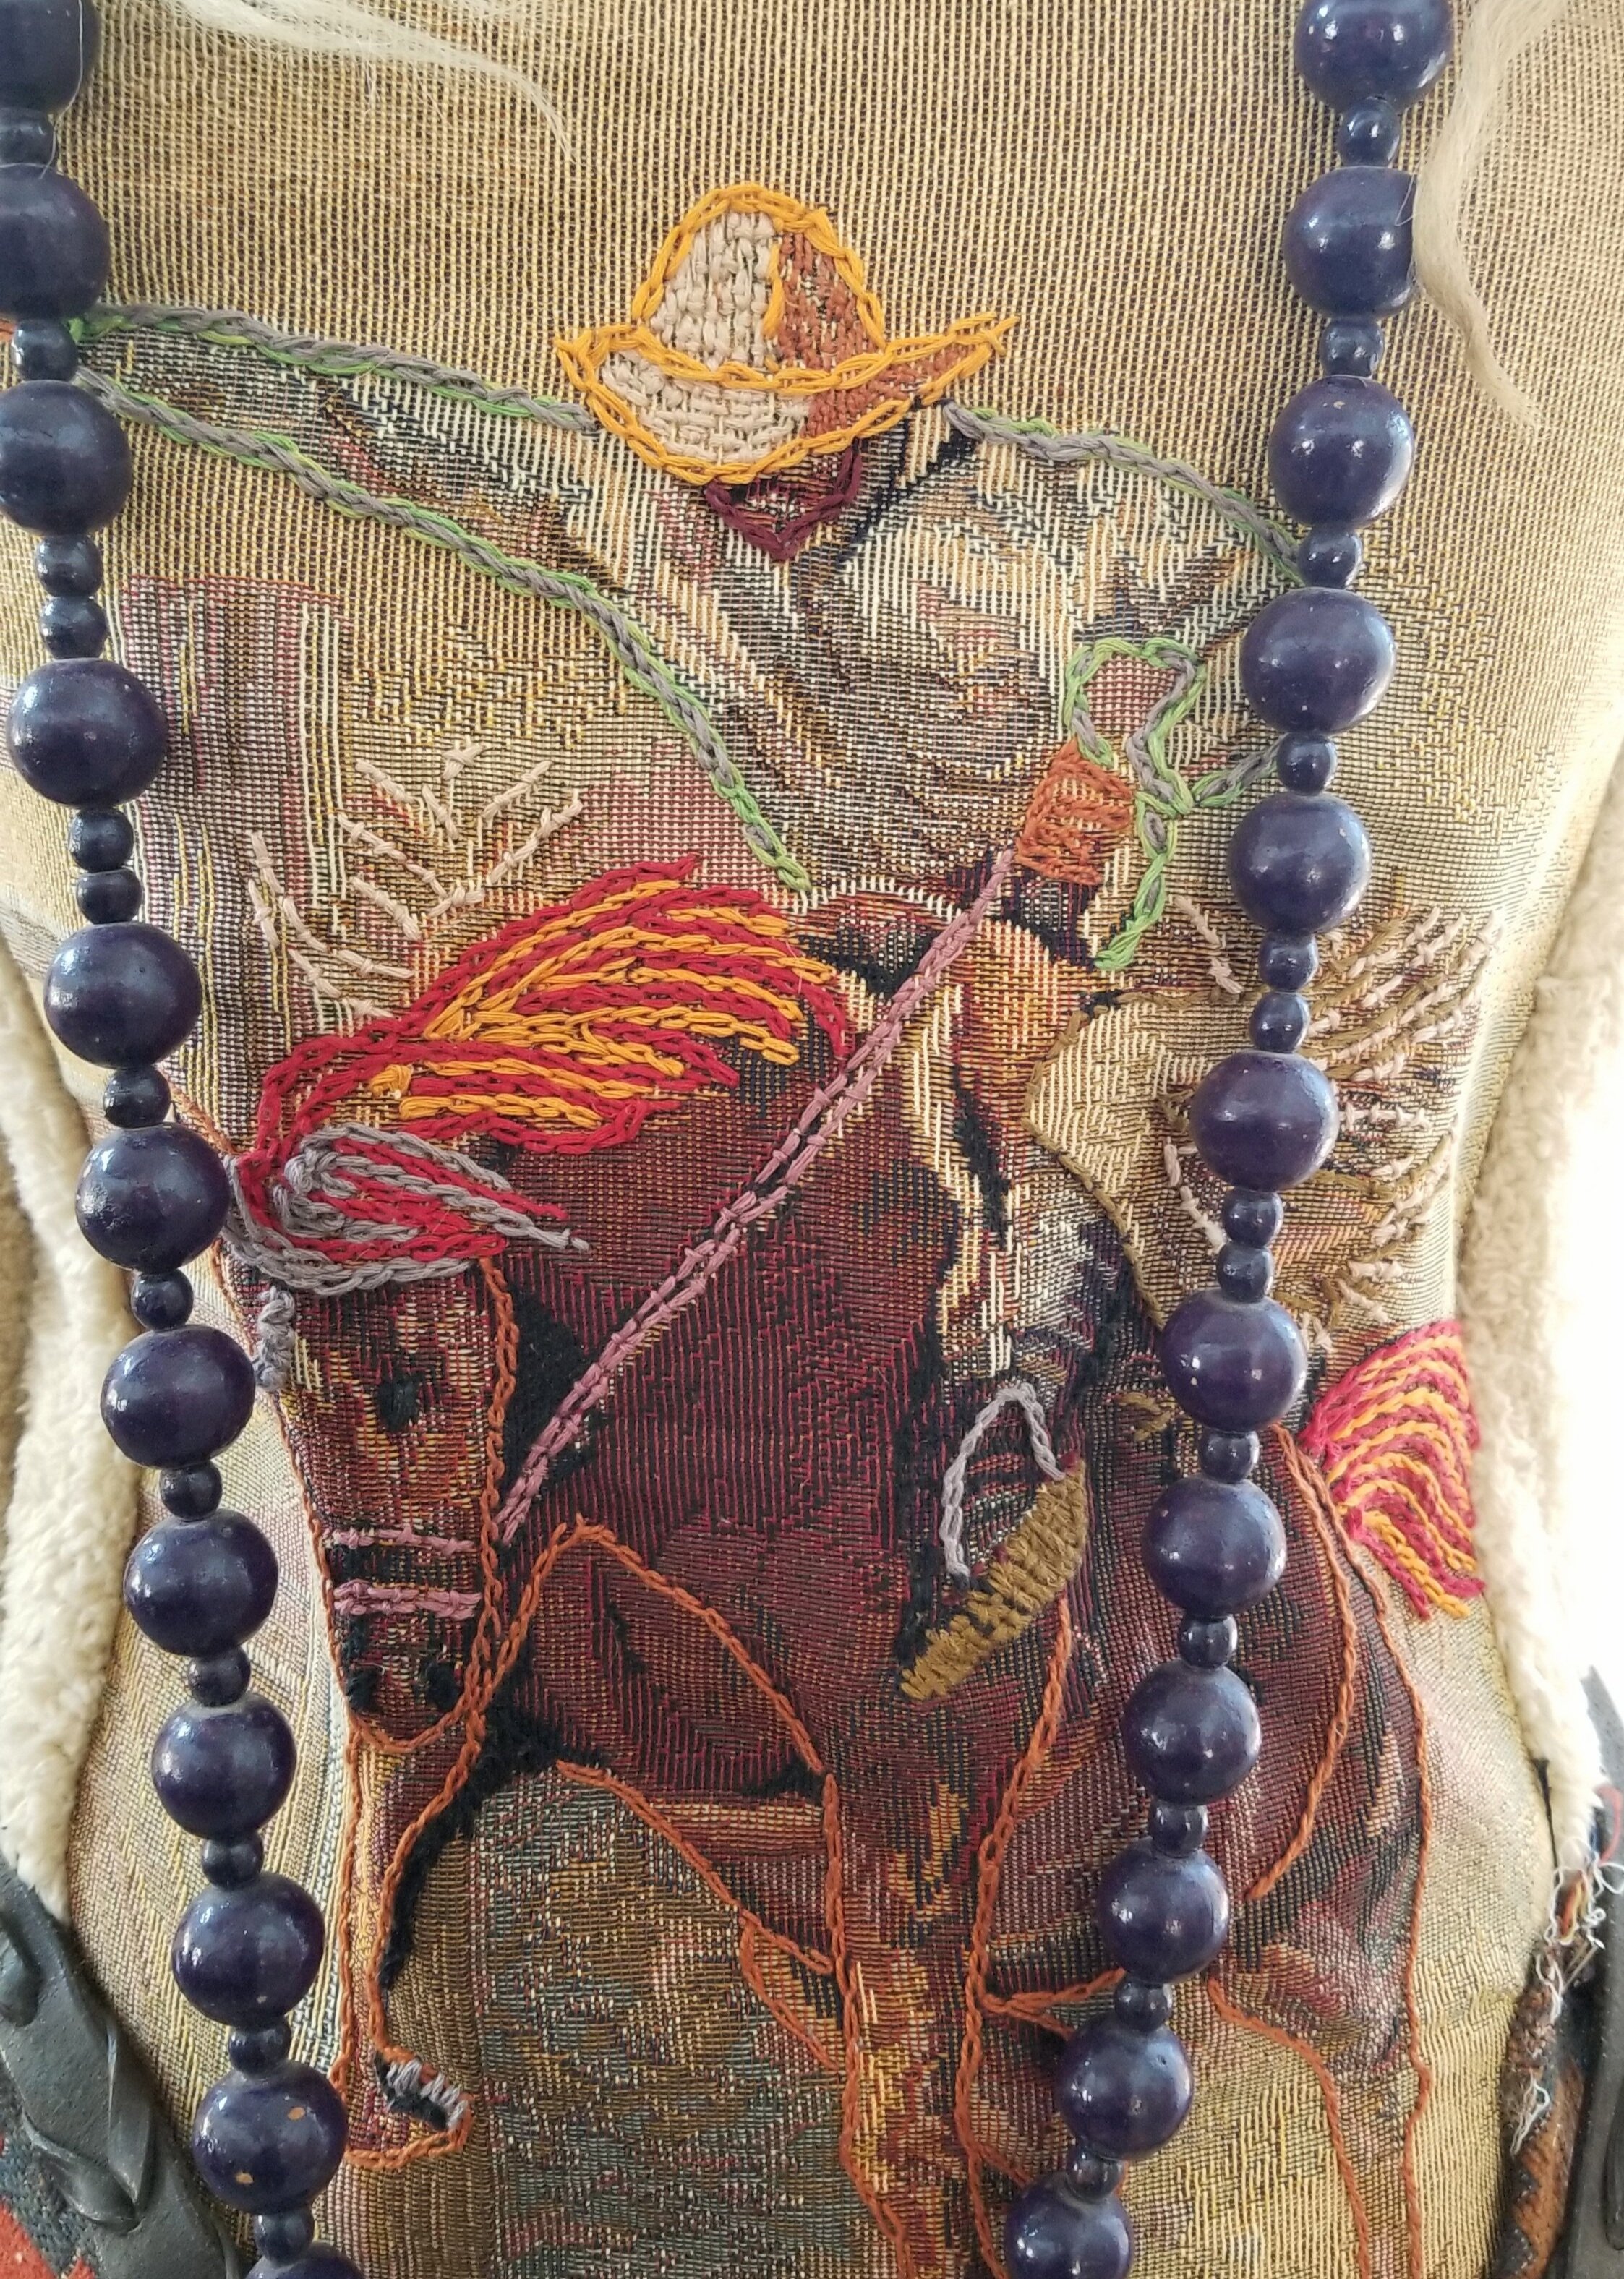 Embroidered bodice (atop the image imprinted on textile) with Colcha and chain stitches